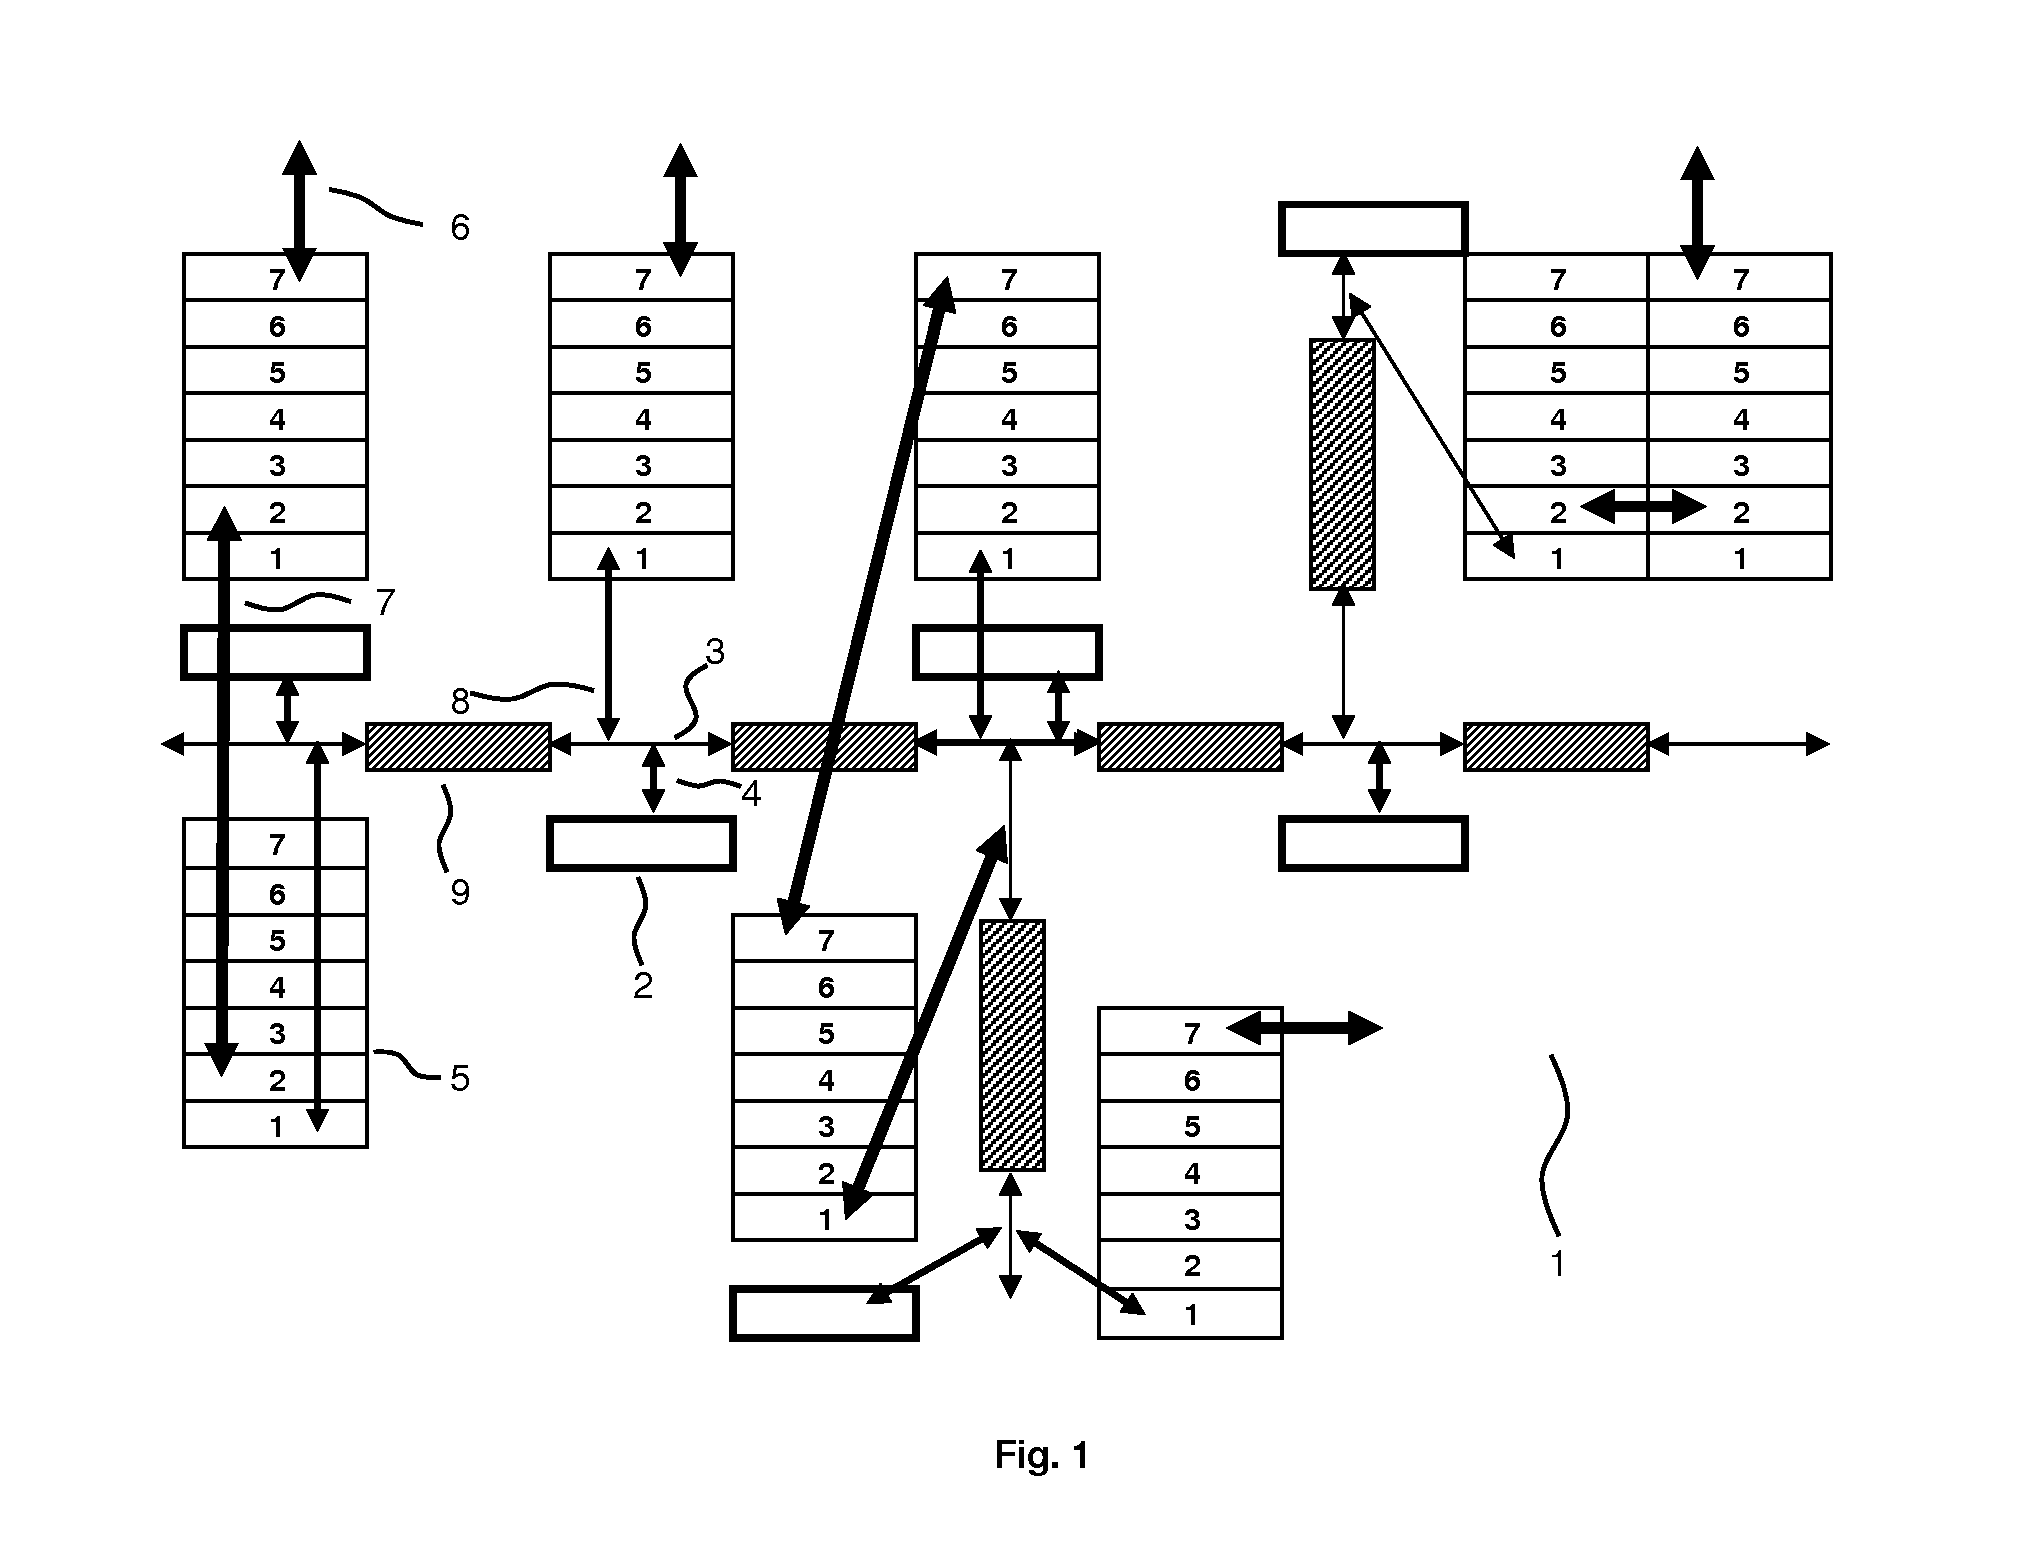 Signal repeater system arrangement for stable data communication